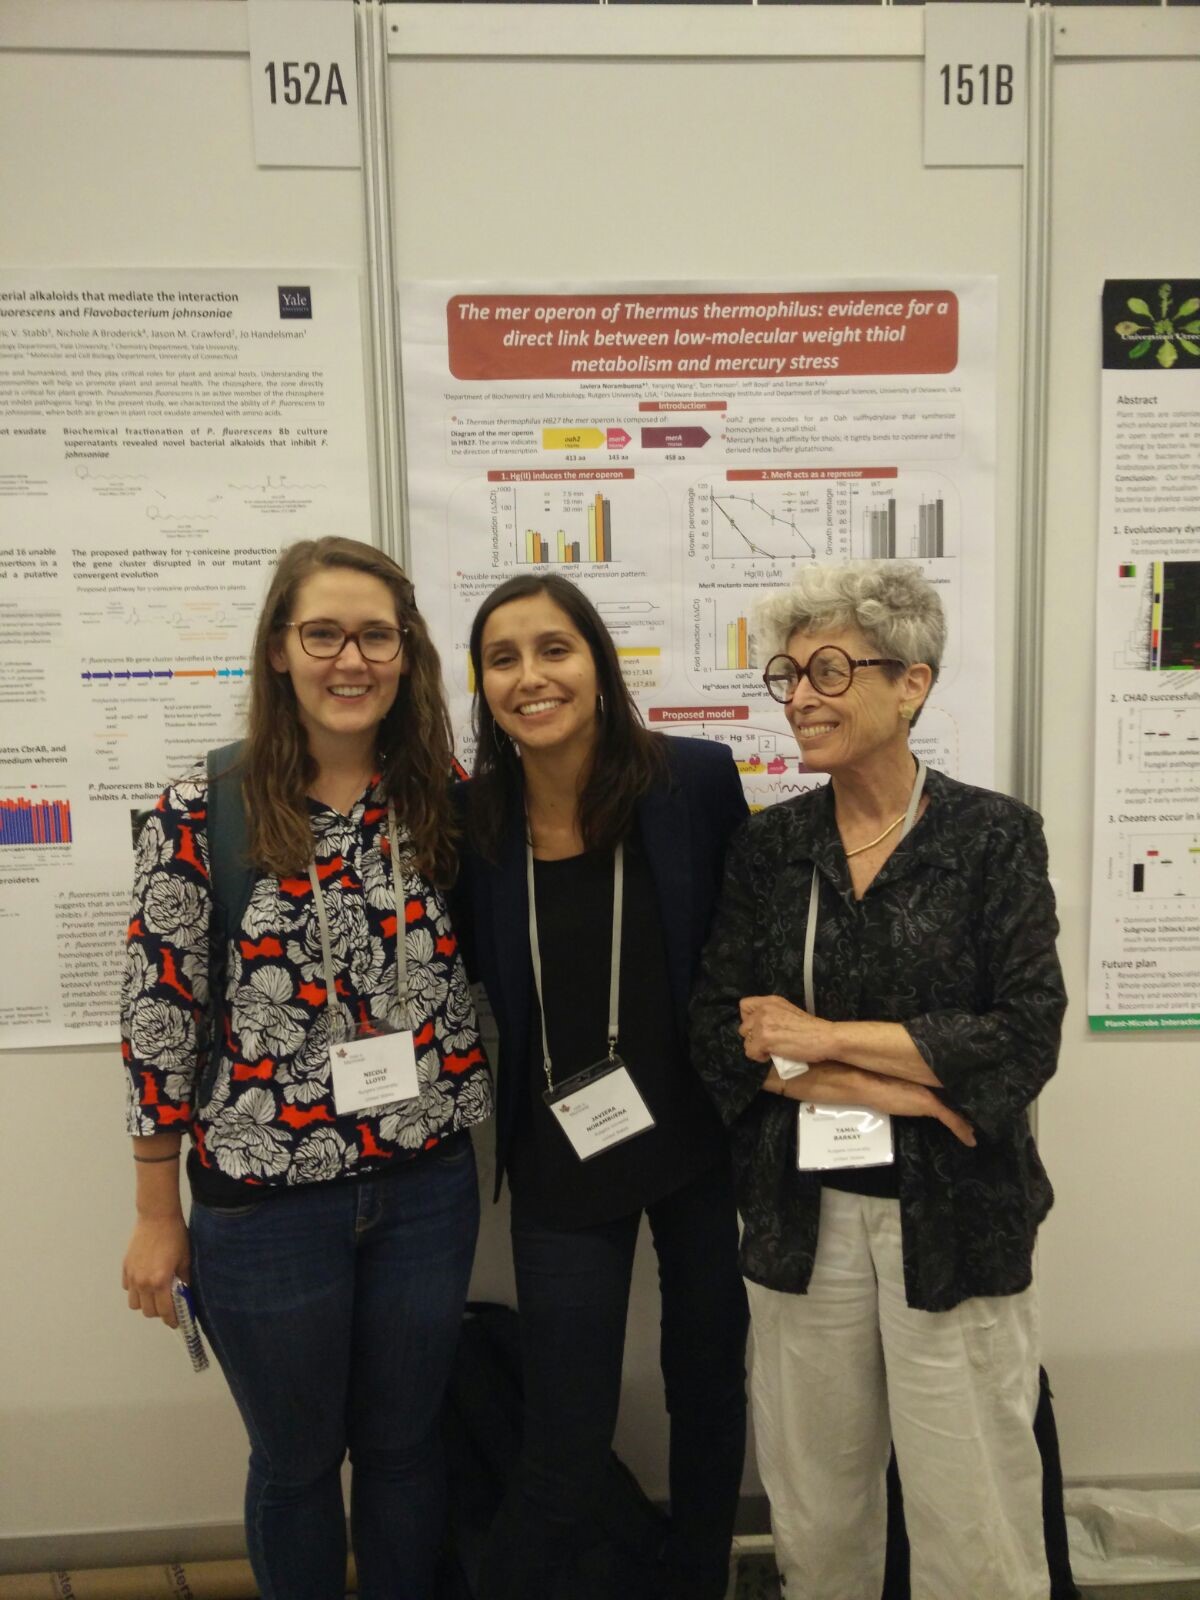 Nicole Lloyd, Javiera N Morales, and Tamar Barkay standing in front of a poster.